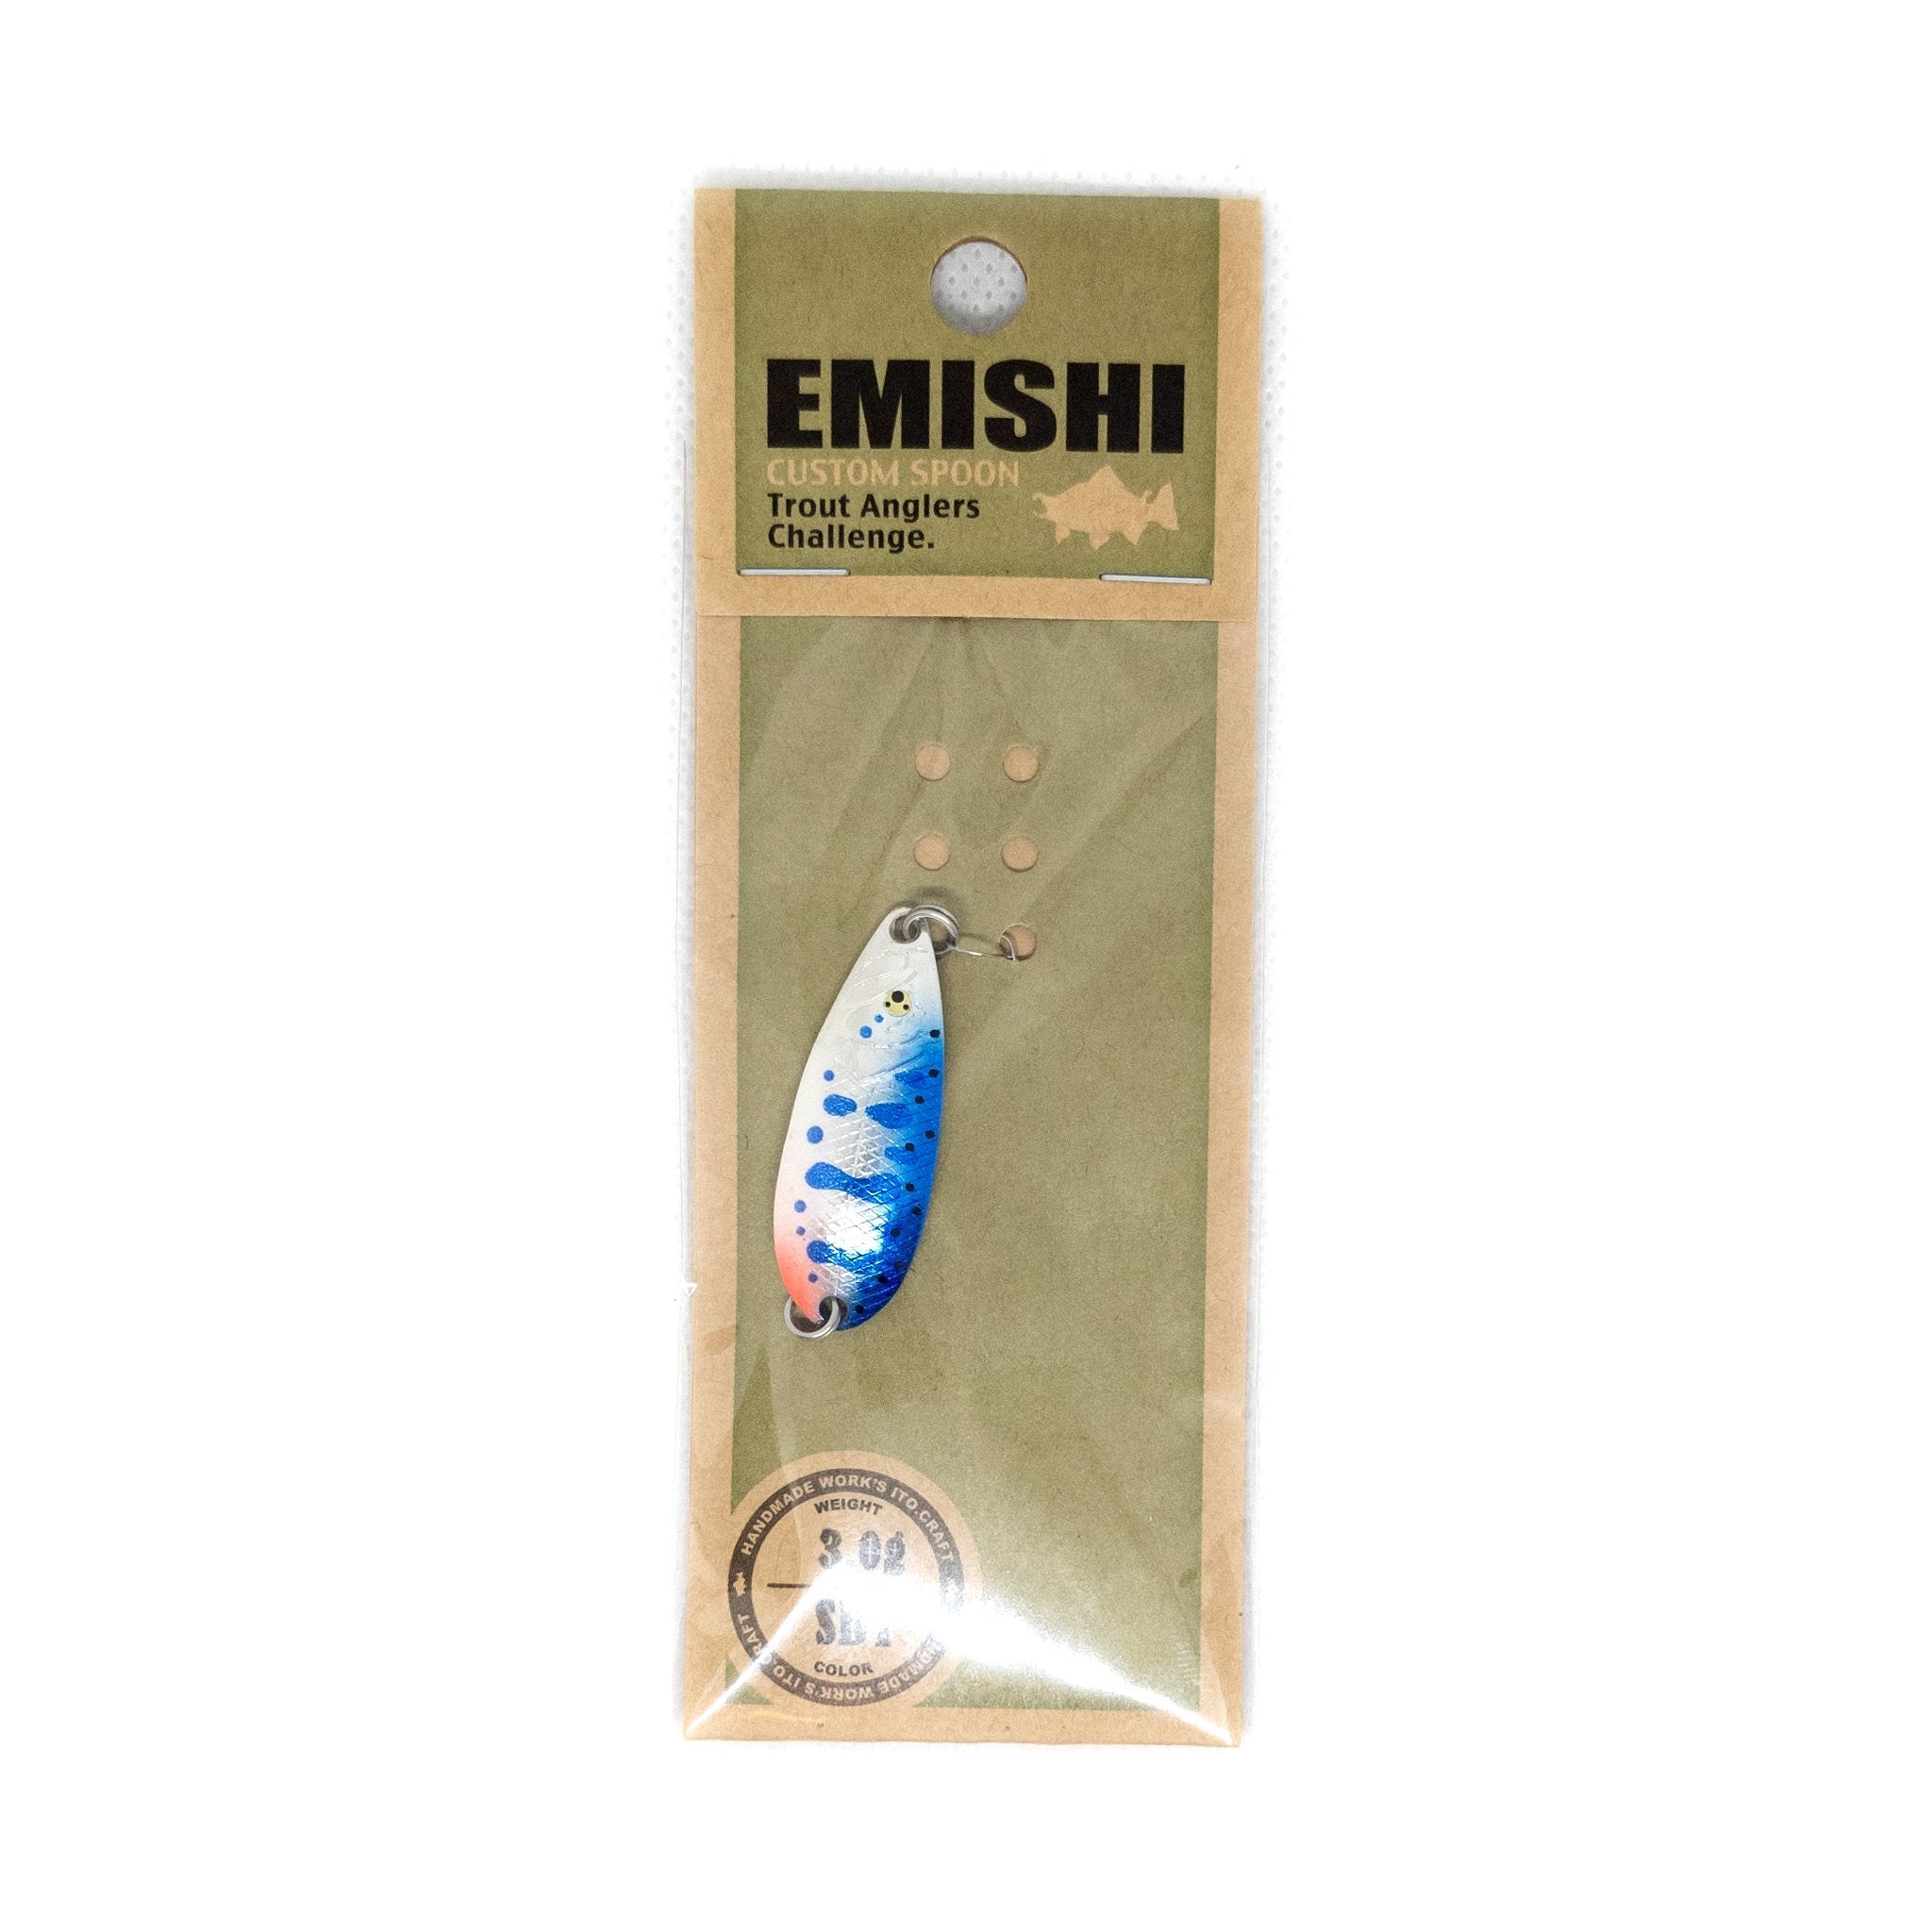 Emishi Spoon 37 3g Color "SBY" - The Borrowed Lure